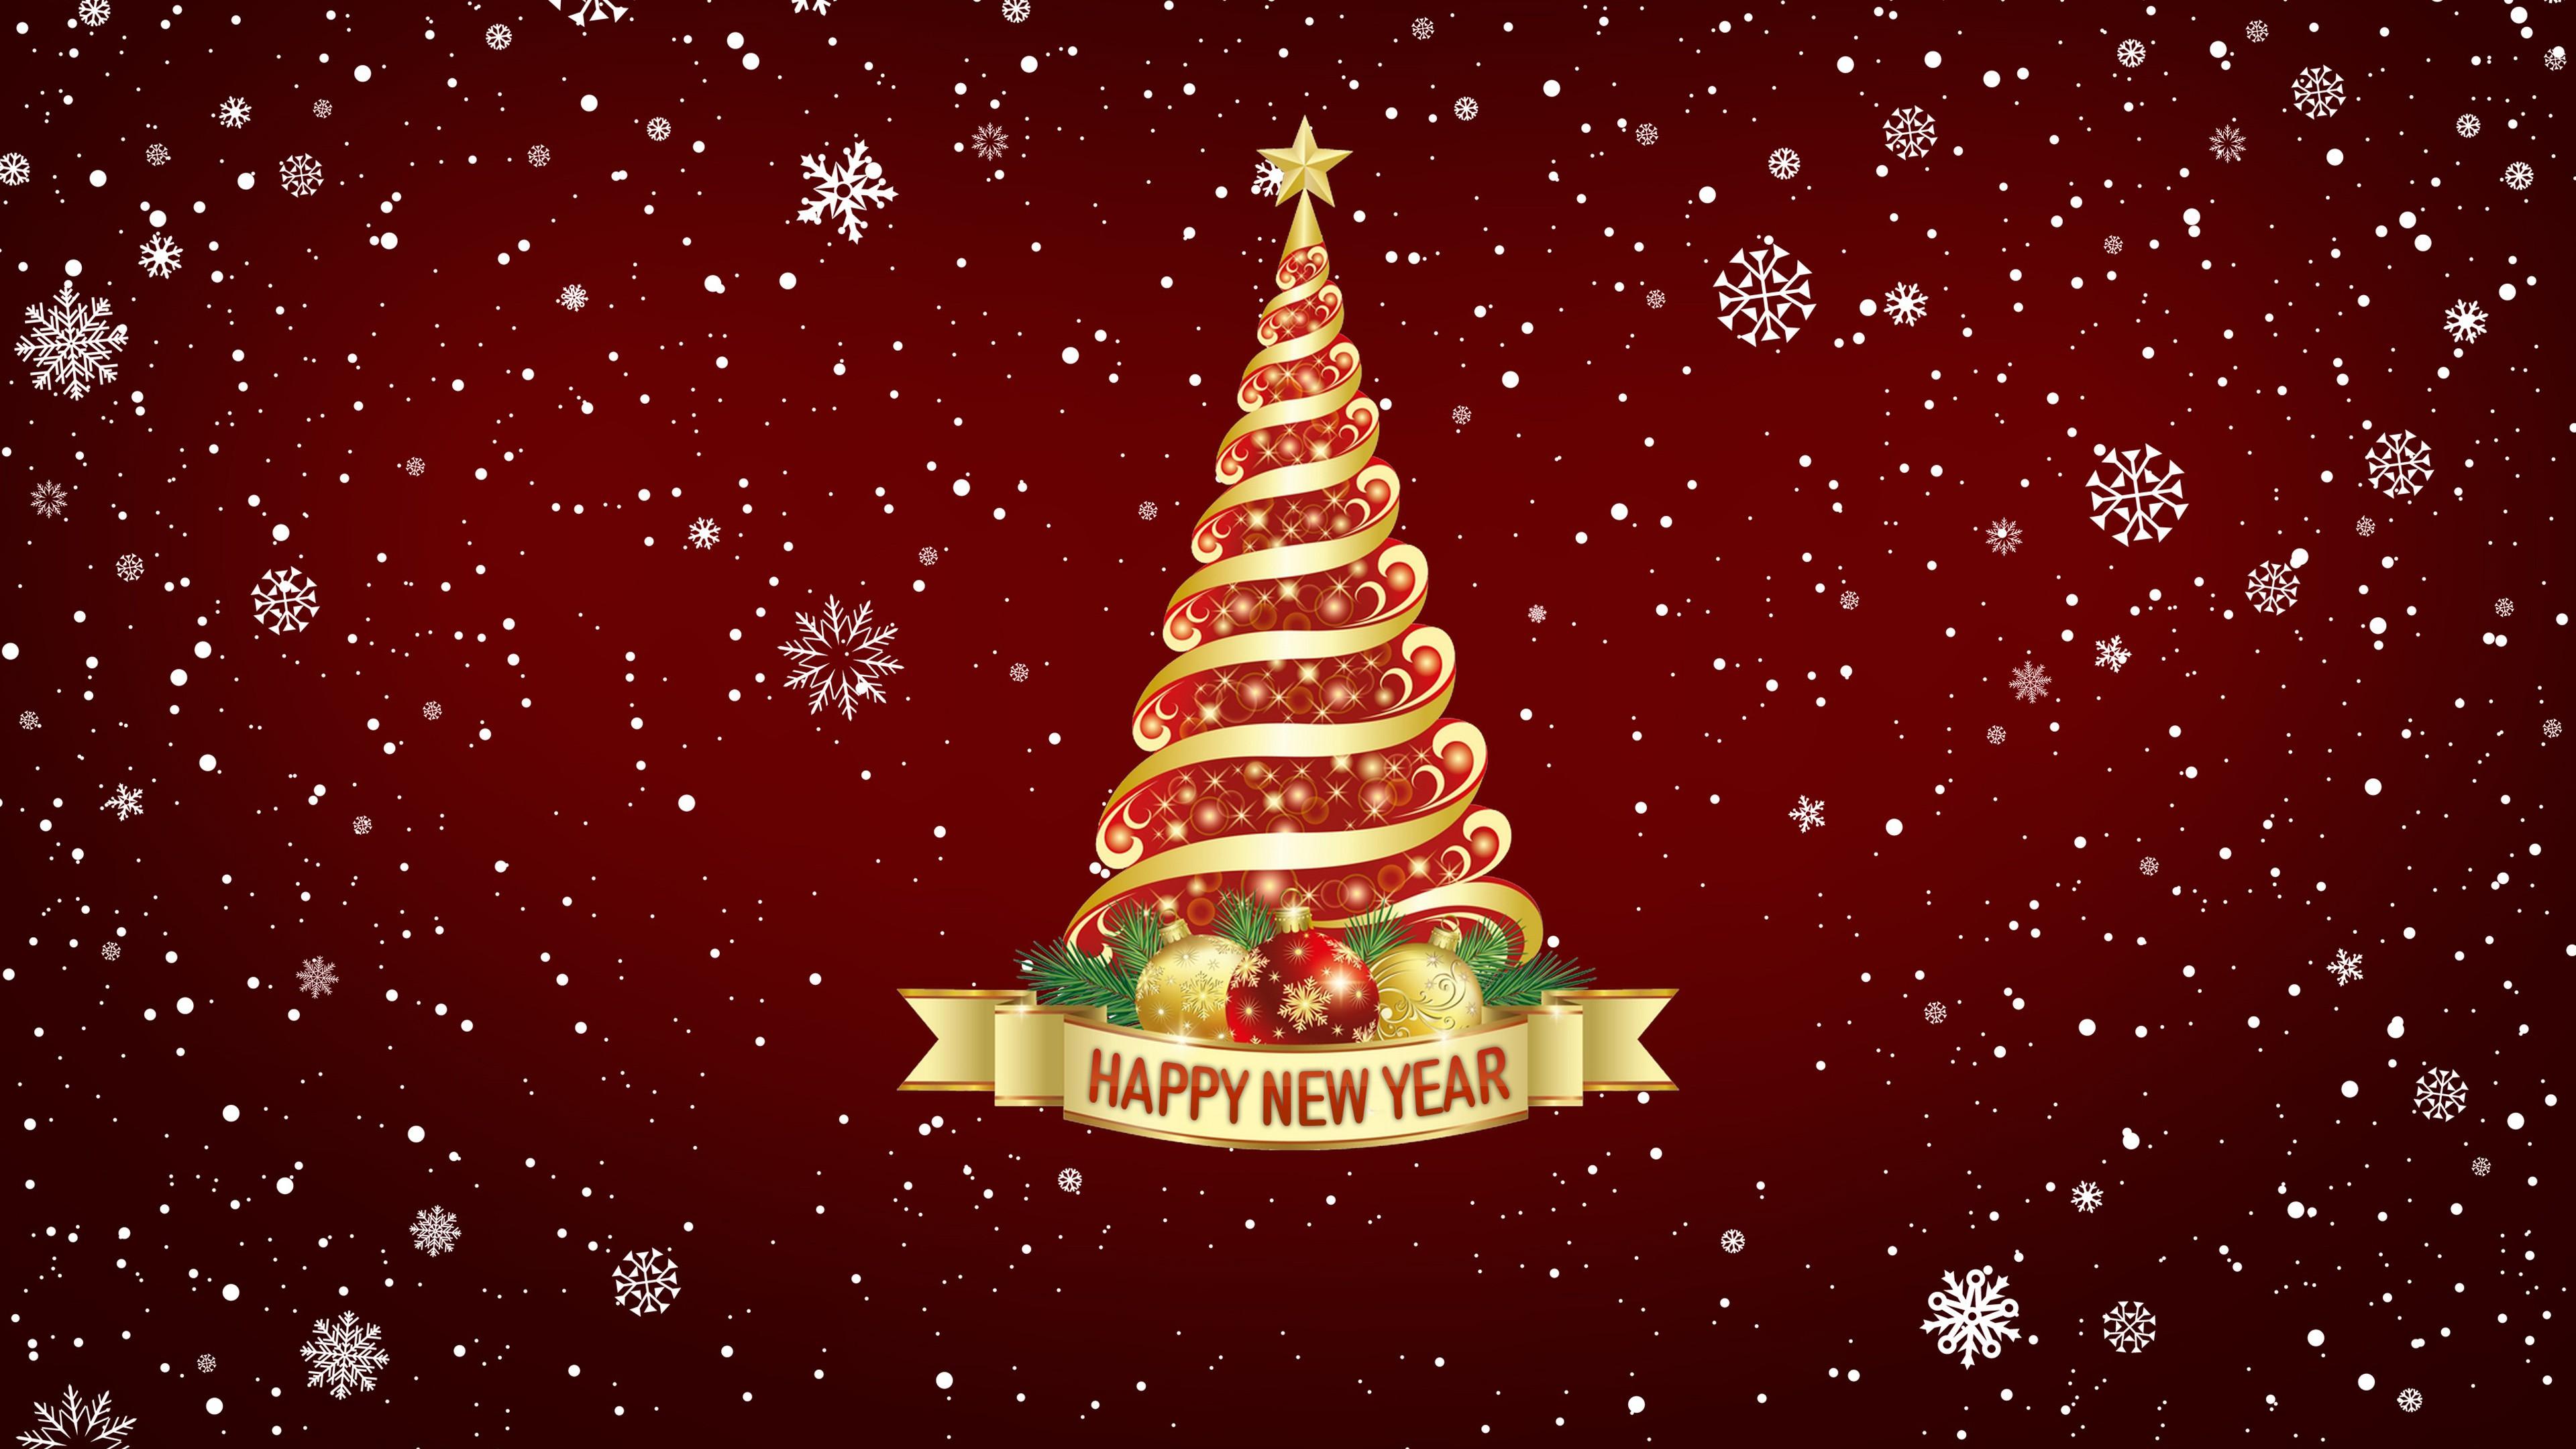 Happy New Year Christmas Tree Snowflake Backgrounds 4K